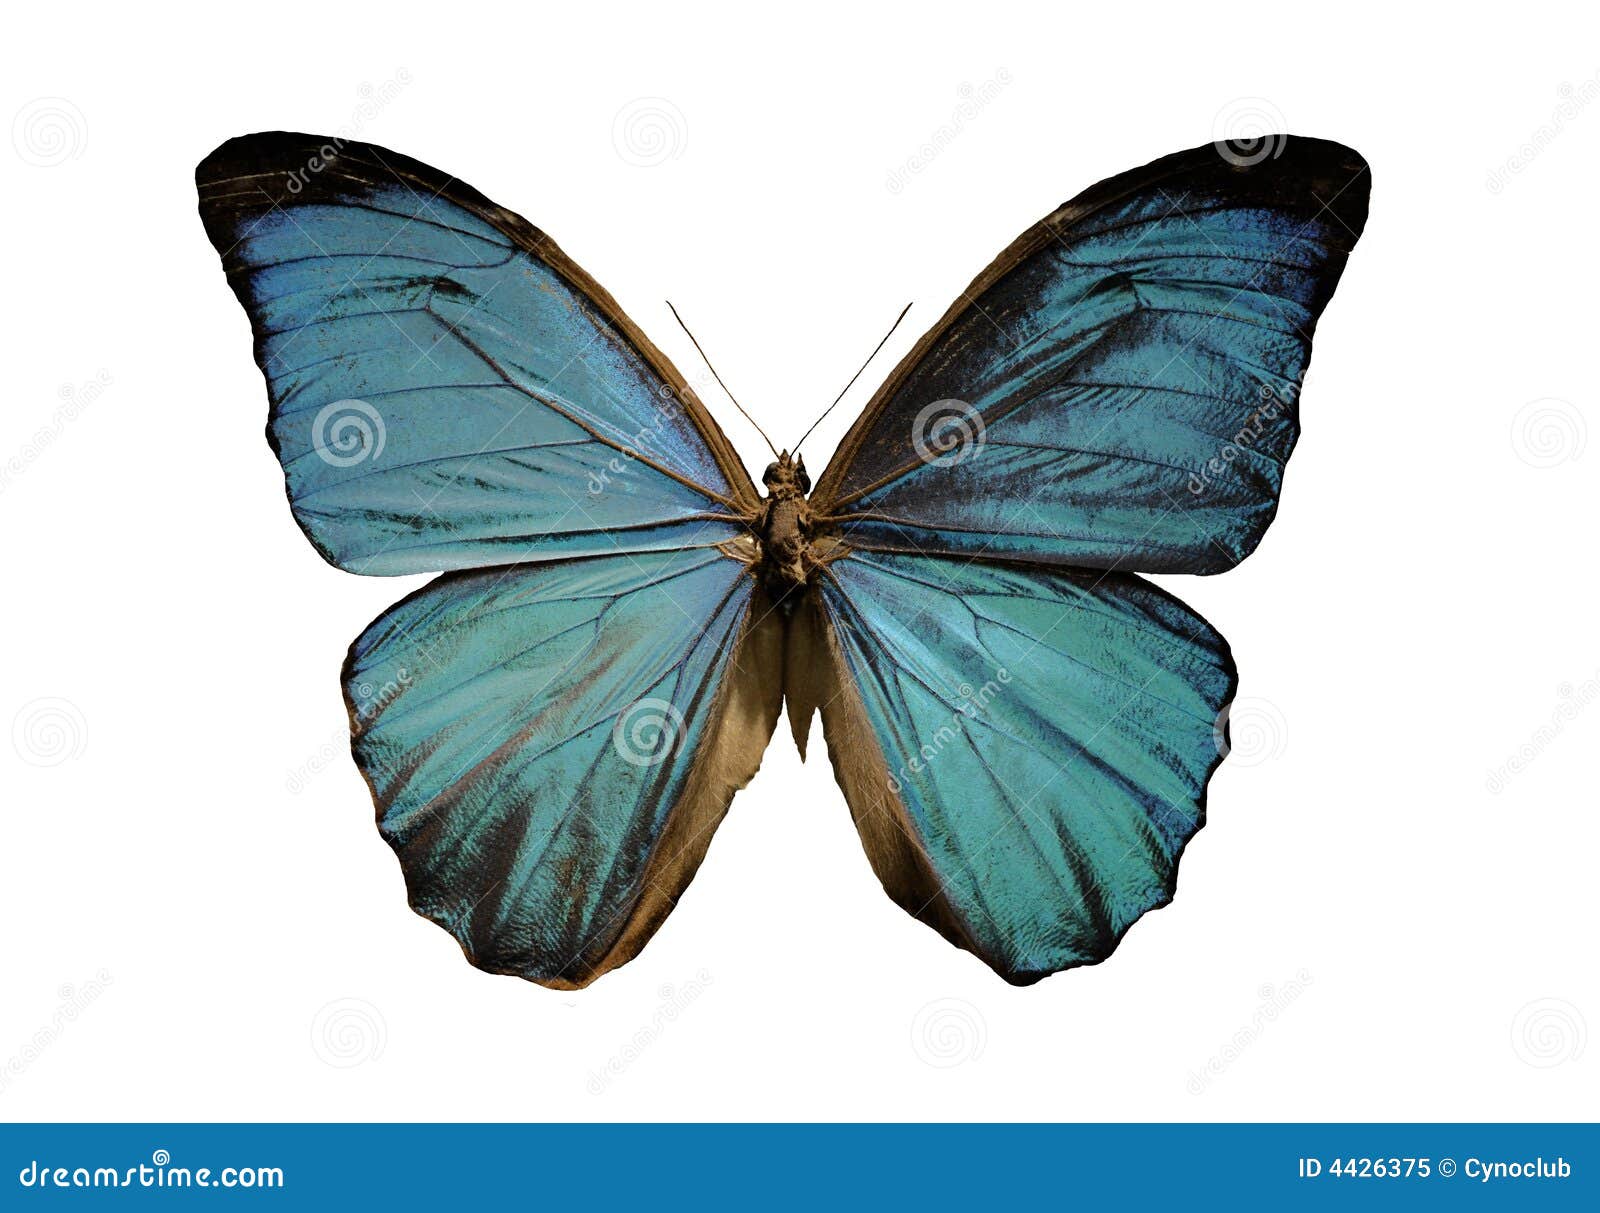 Blue morpho butterfly stock image. Image of blue, beautiful 4426375